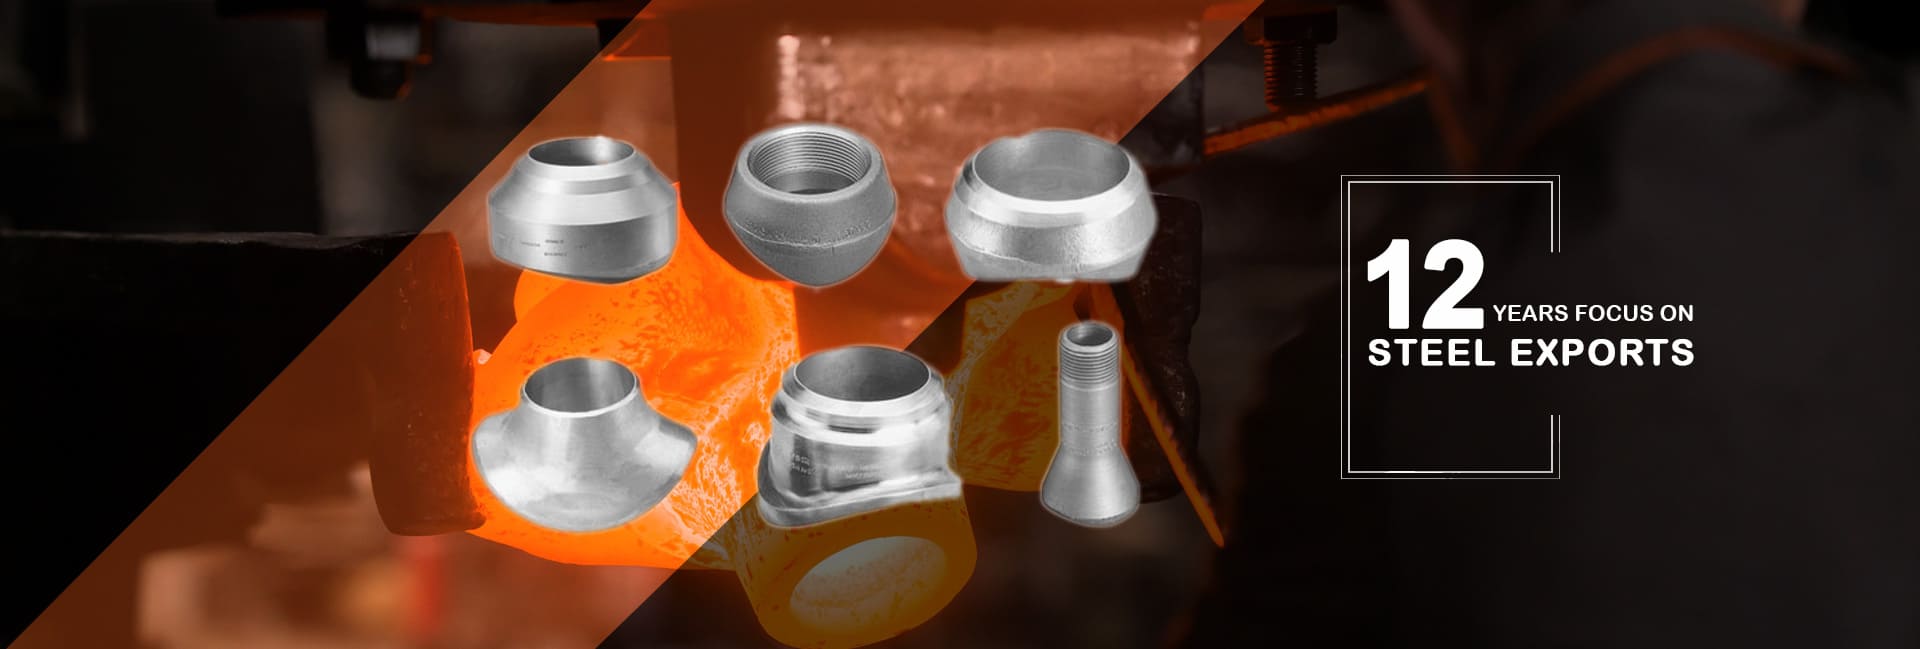 Alloy 20 Outlet Fittings